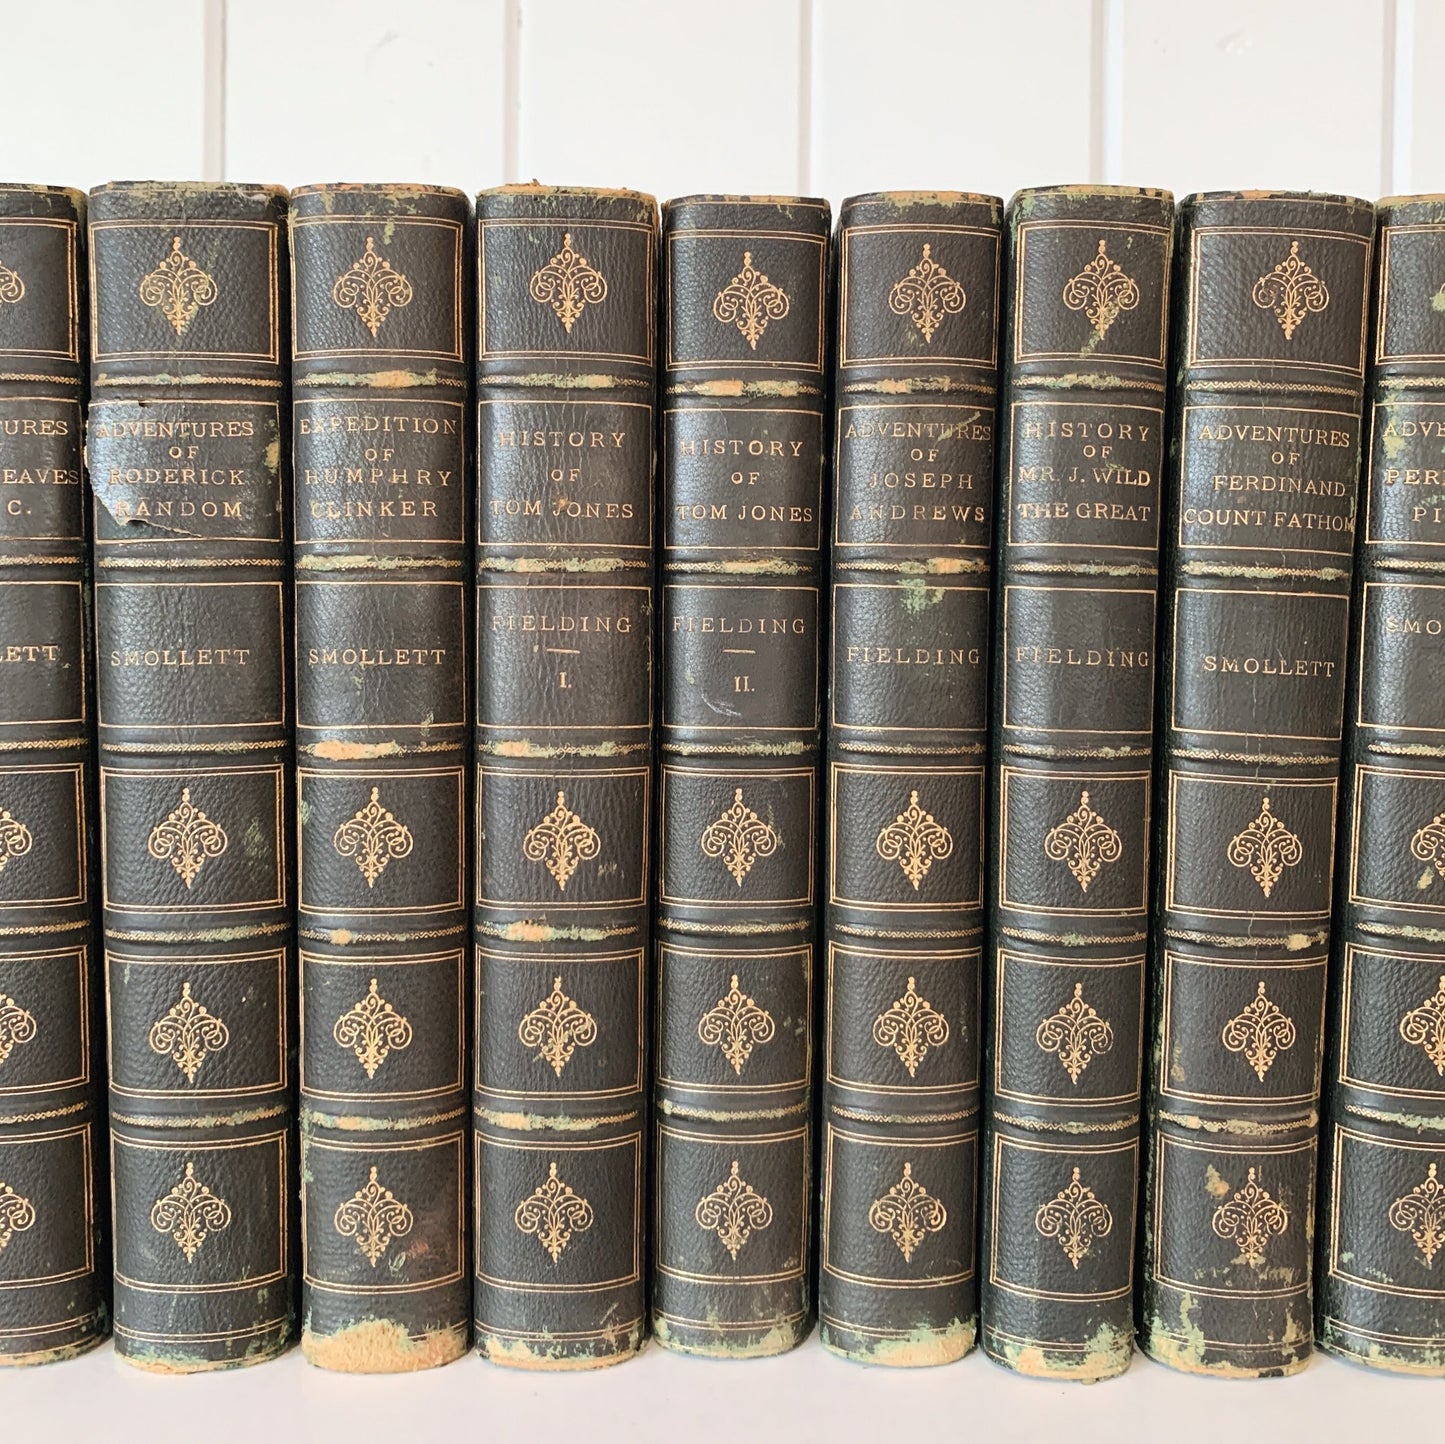 Tobias Smollett’s Novels, 1884, George Routledge and Sons